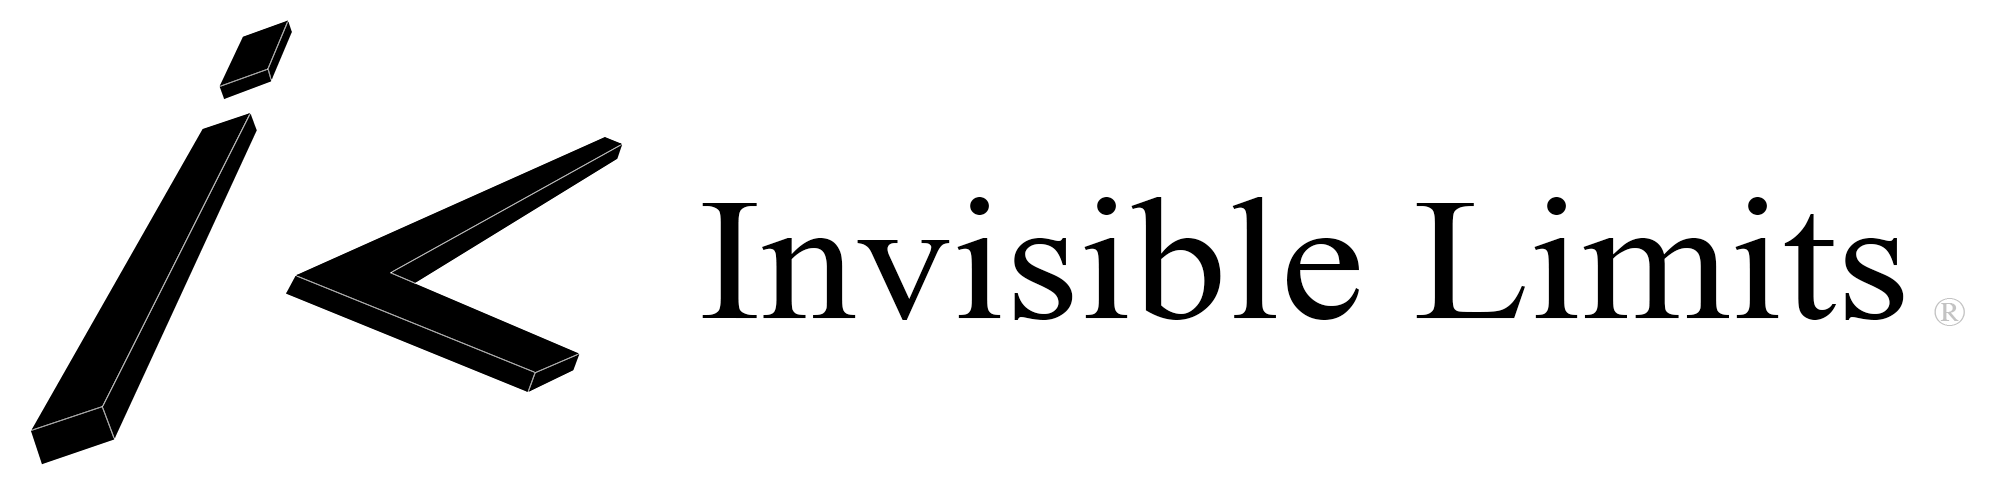 INVISIBLE LIMITS